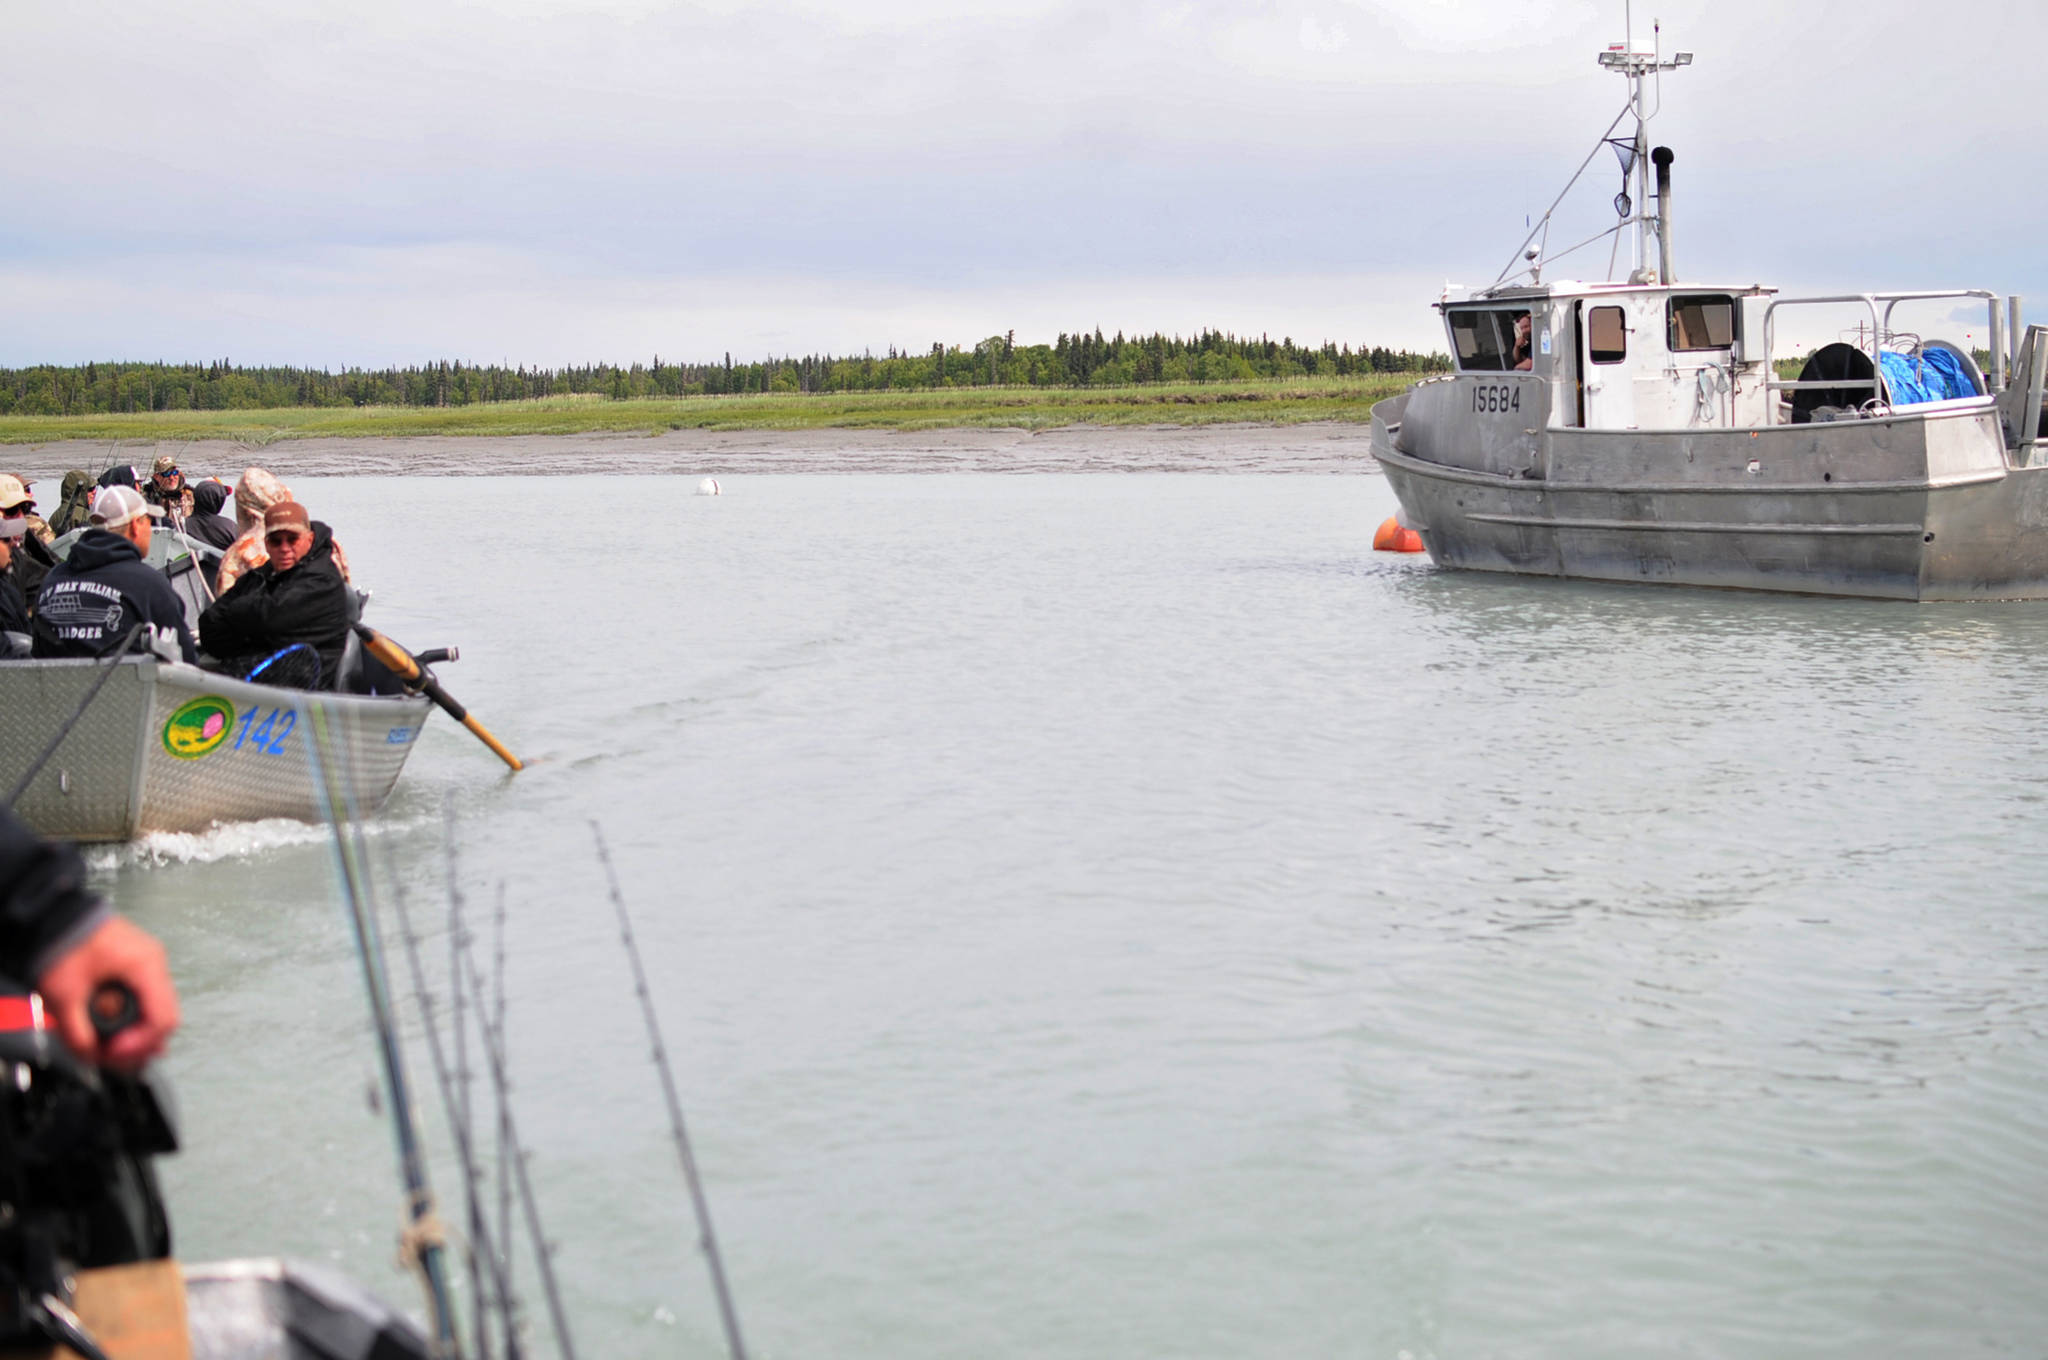 Bill Russell, a fishing guide at Russell Fishing Company, tows two fishing boats full of clients past a docked commercial fishing vessel on the Kasilof River on Monday, June 19, 2017 in Kasilof, Alaska. (Photo by Elizabeth Earl/Peninsula Clarion)